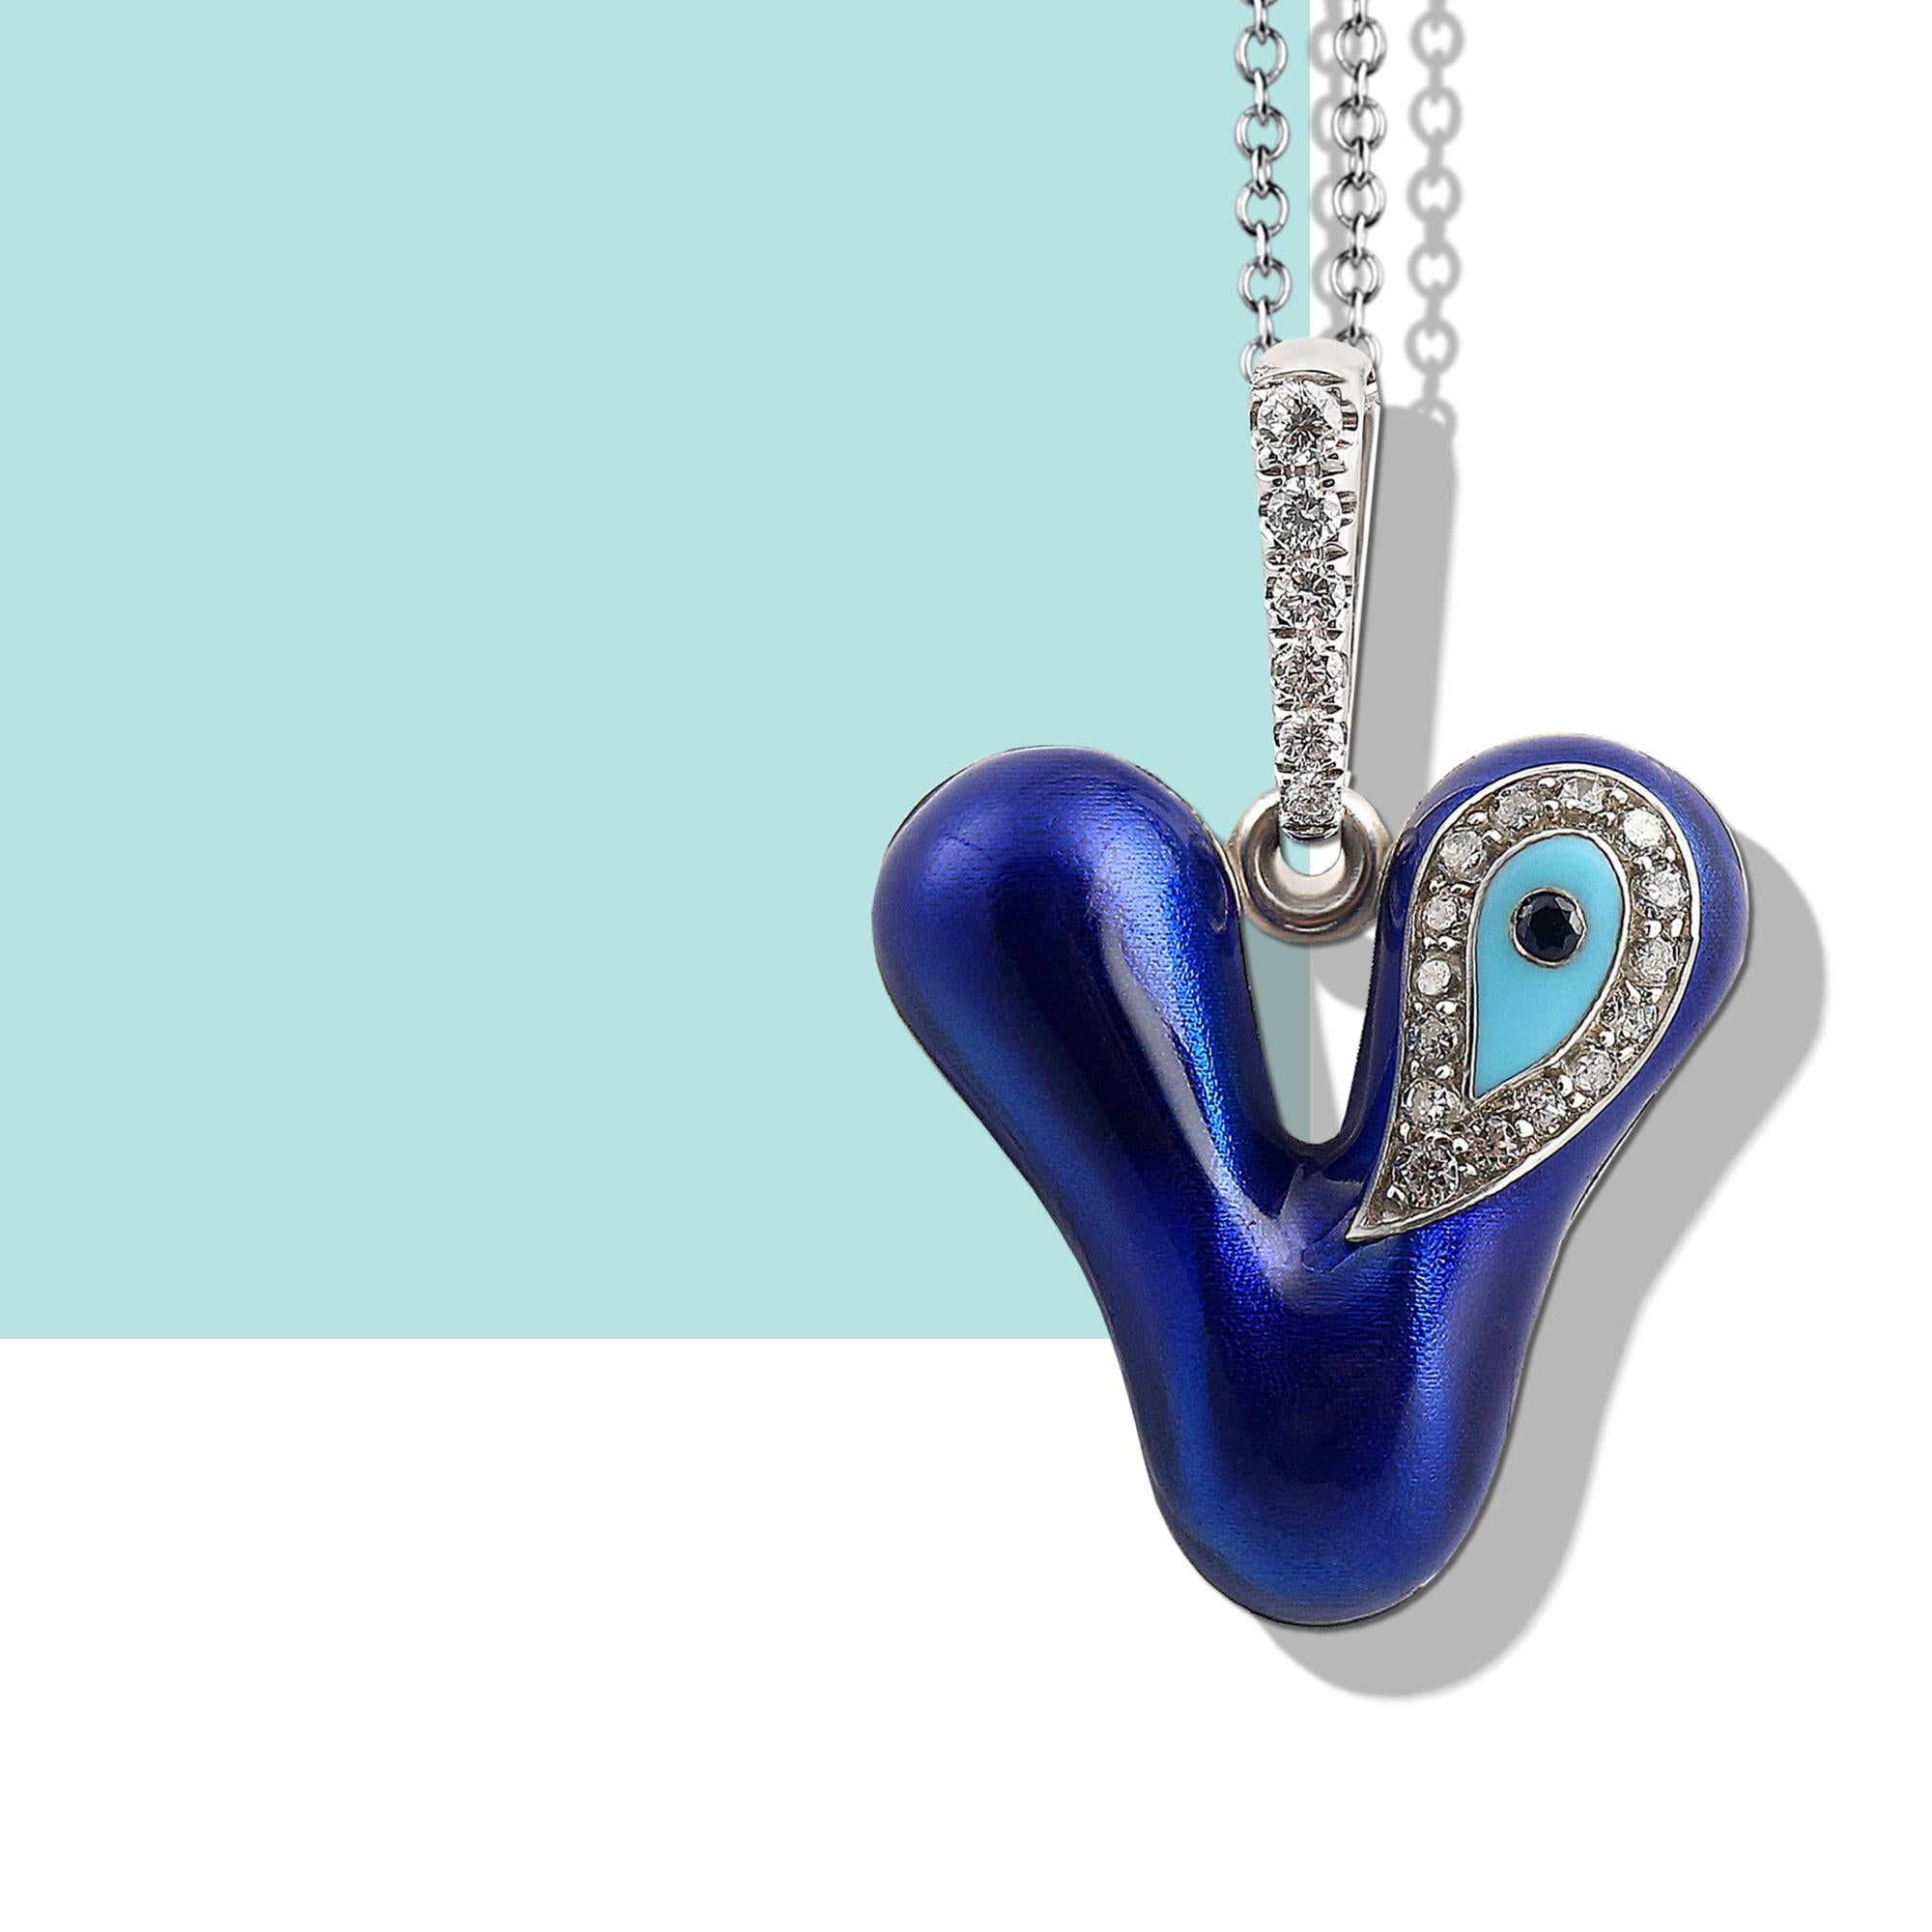 Life Is Too Short To Wear Boring Jewelry! Crafted From 14K Gold, This Vertical Illusion Diamond Pave Evil Eye’s Initial Necklace From Nazarlique Can Instantly Elevate Your Look To Another Level.

Diamond and Sapphire Letter Form Blue Turquoise